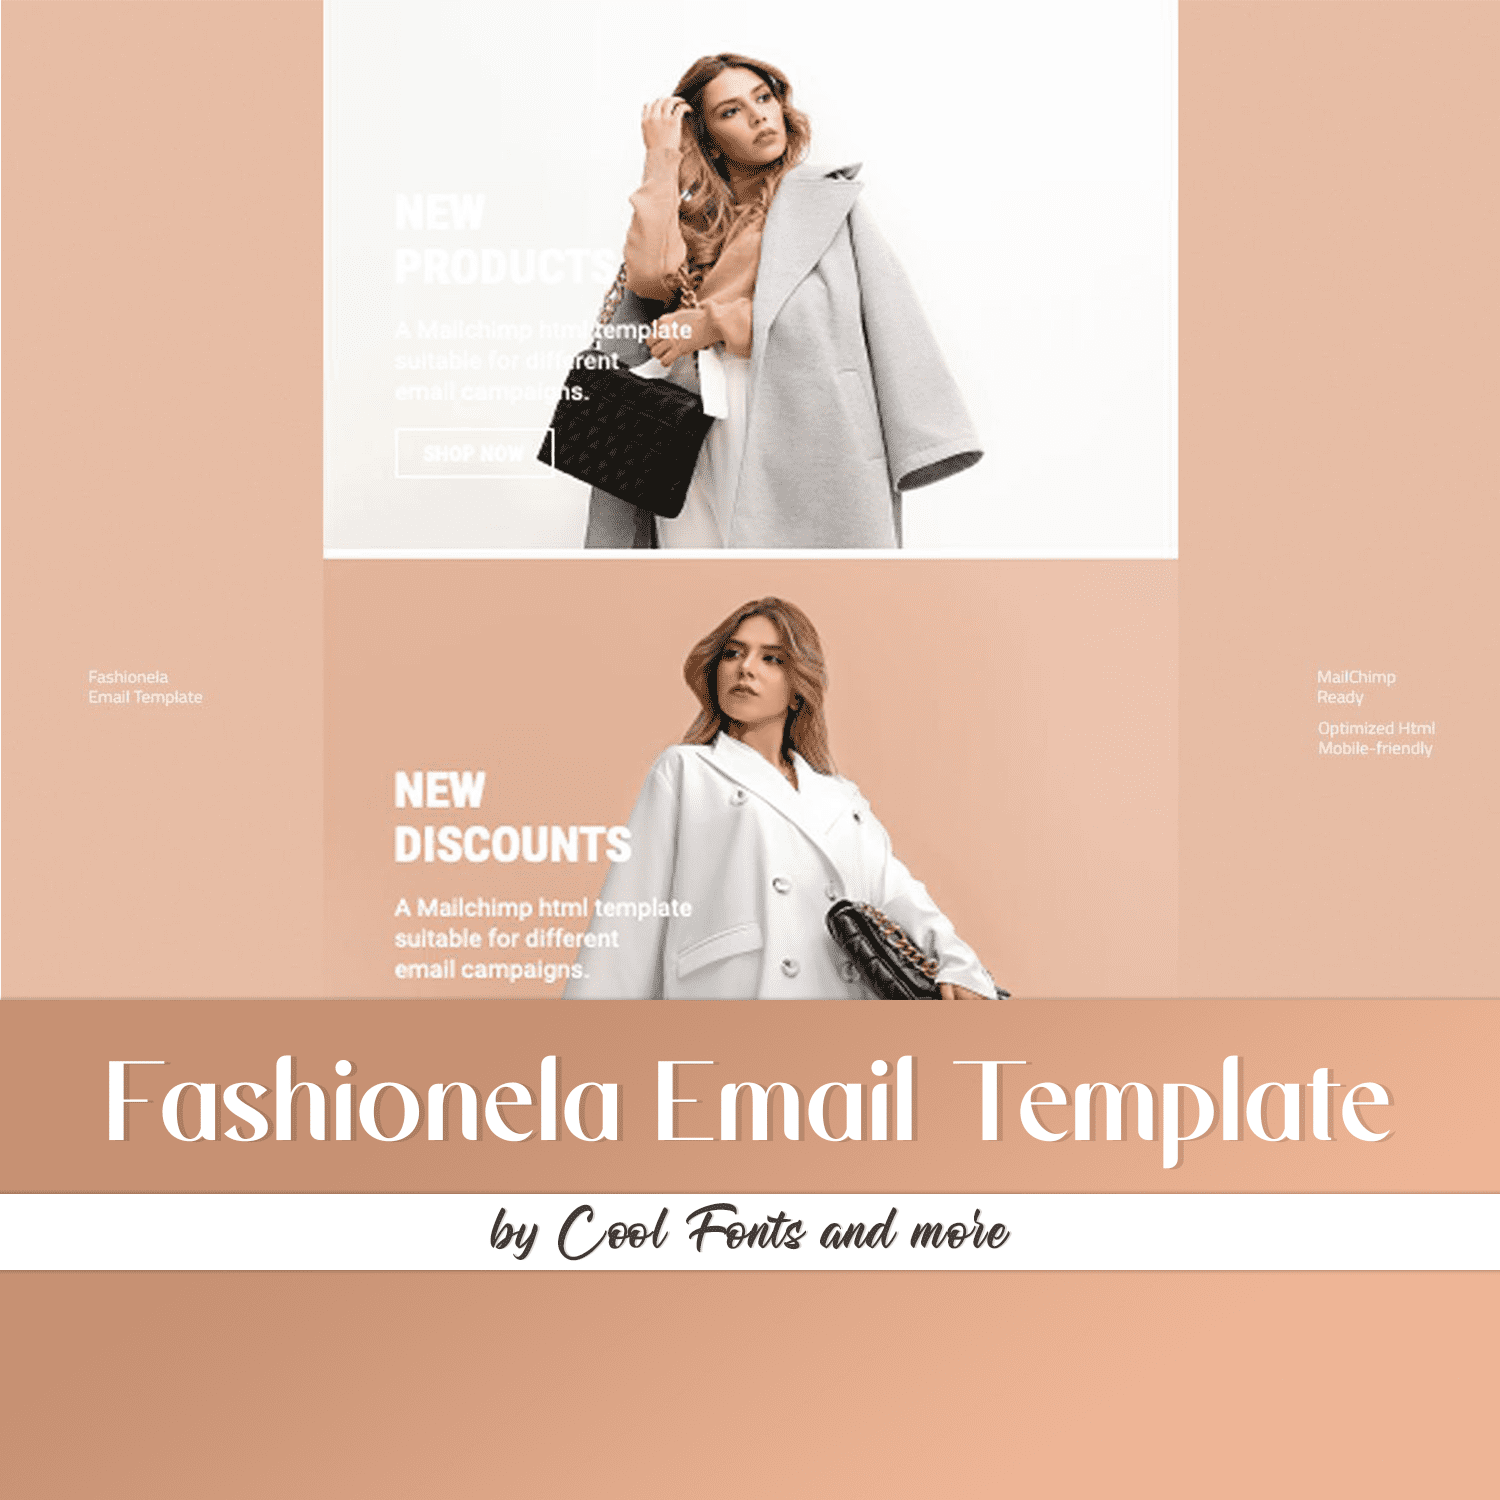 An image pack of a gorgeous fashion email design template.